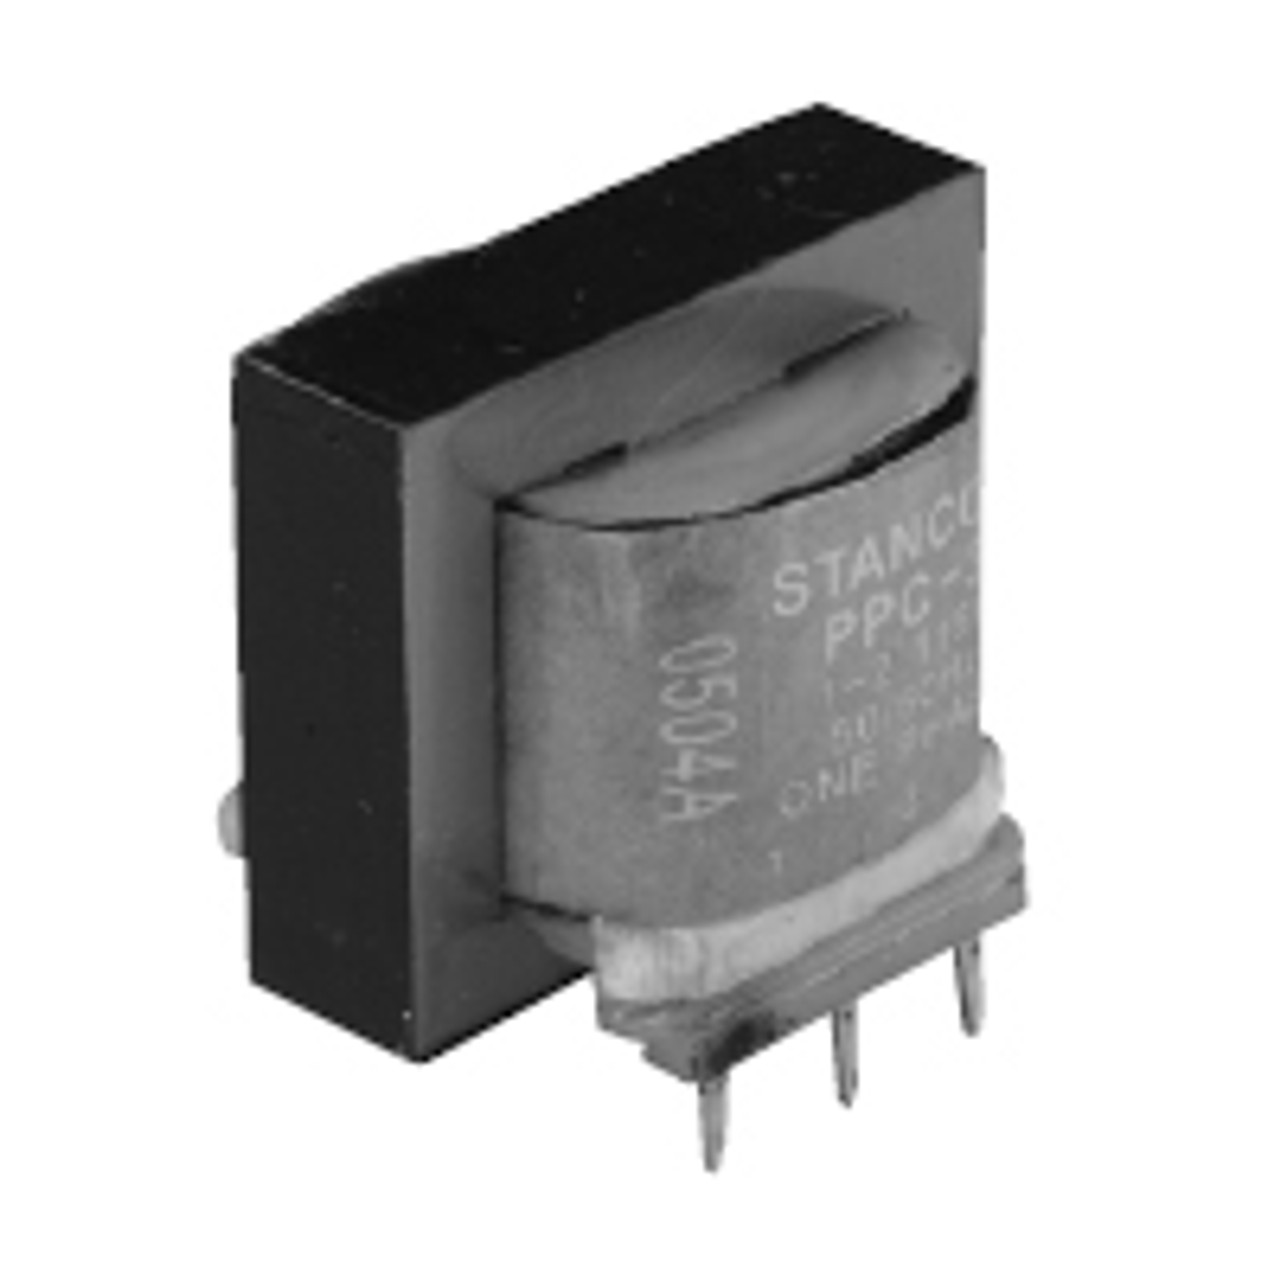 Stancor / White Rodgers PPC-1 Printed Circuit Transformers